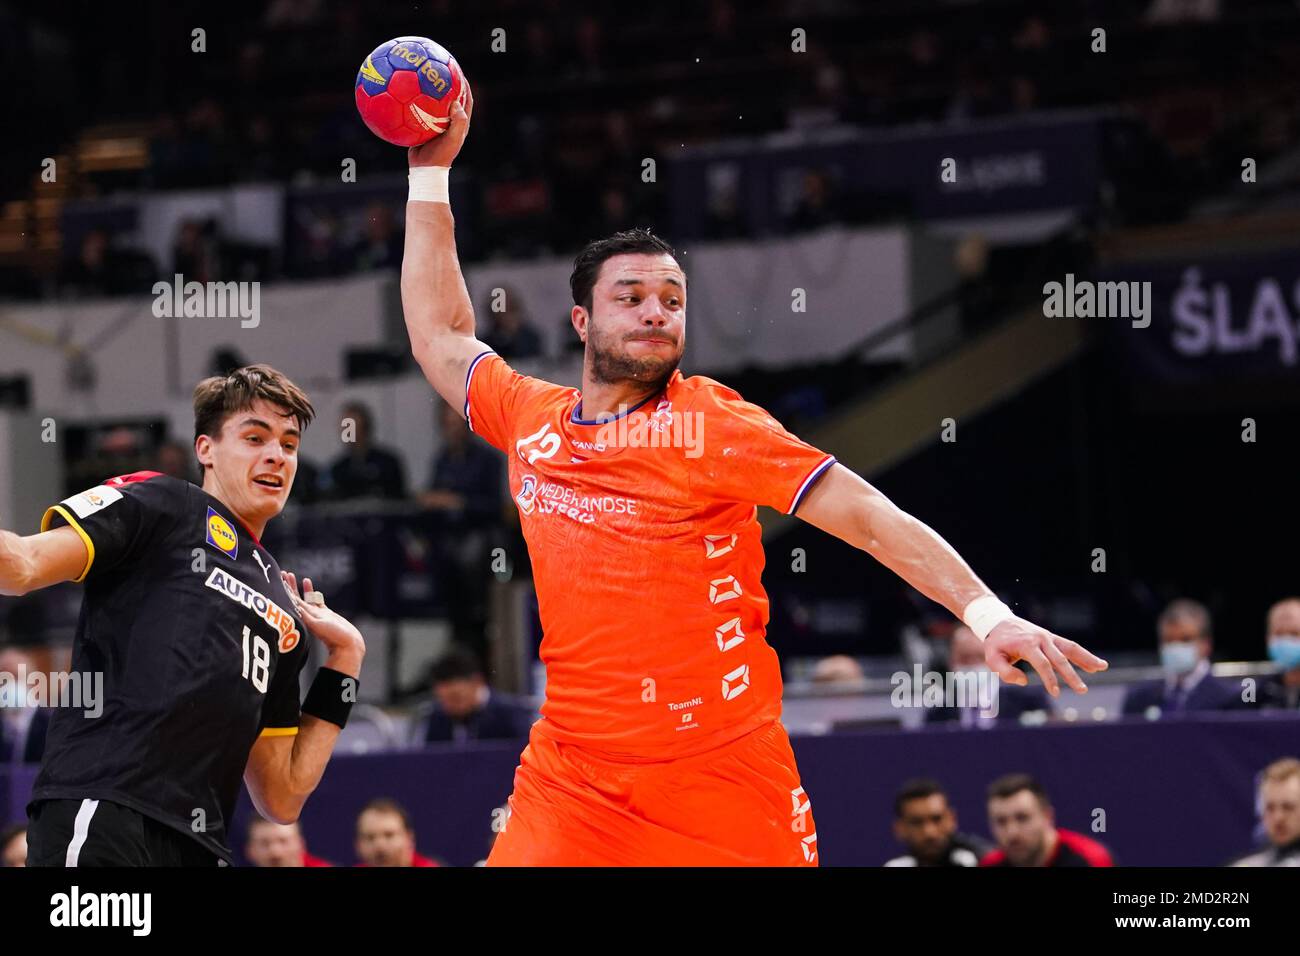 KATOWICE, POLAND - JANUARY 21: Samir Benghanem of The Netherlands, Johannes Golla of Germany during the IHF Men's World Championship - Main Round Group III match between Netherlands and Germany at Spodek on January 21, 2023 in Katowice, Poland (Photo by Henk Seppen/Orange Pictures) Stock Photo